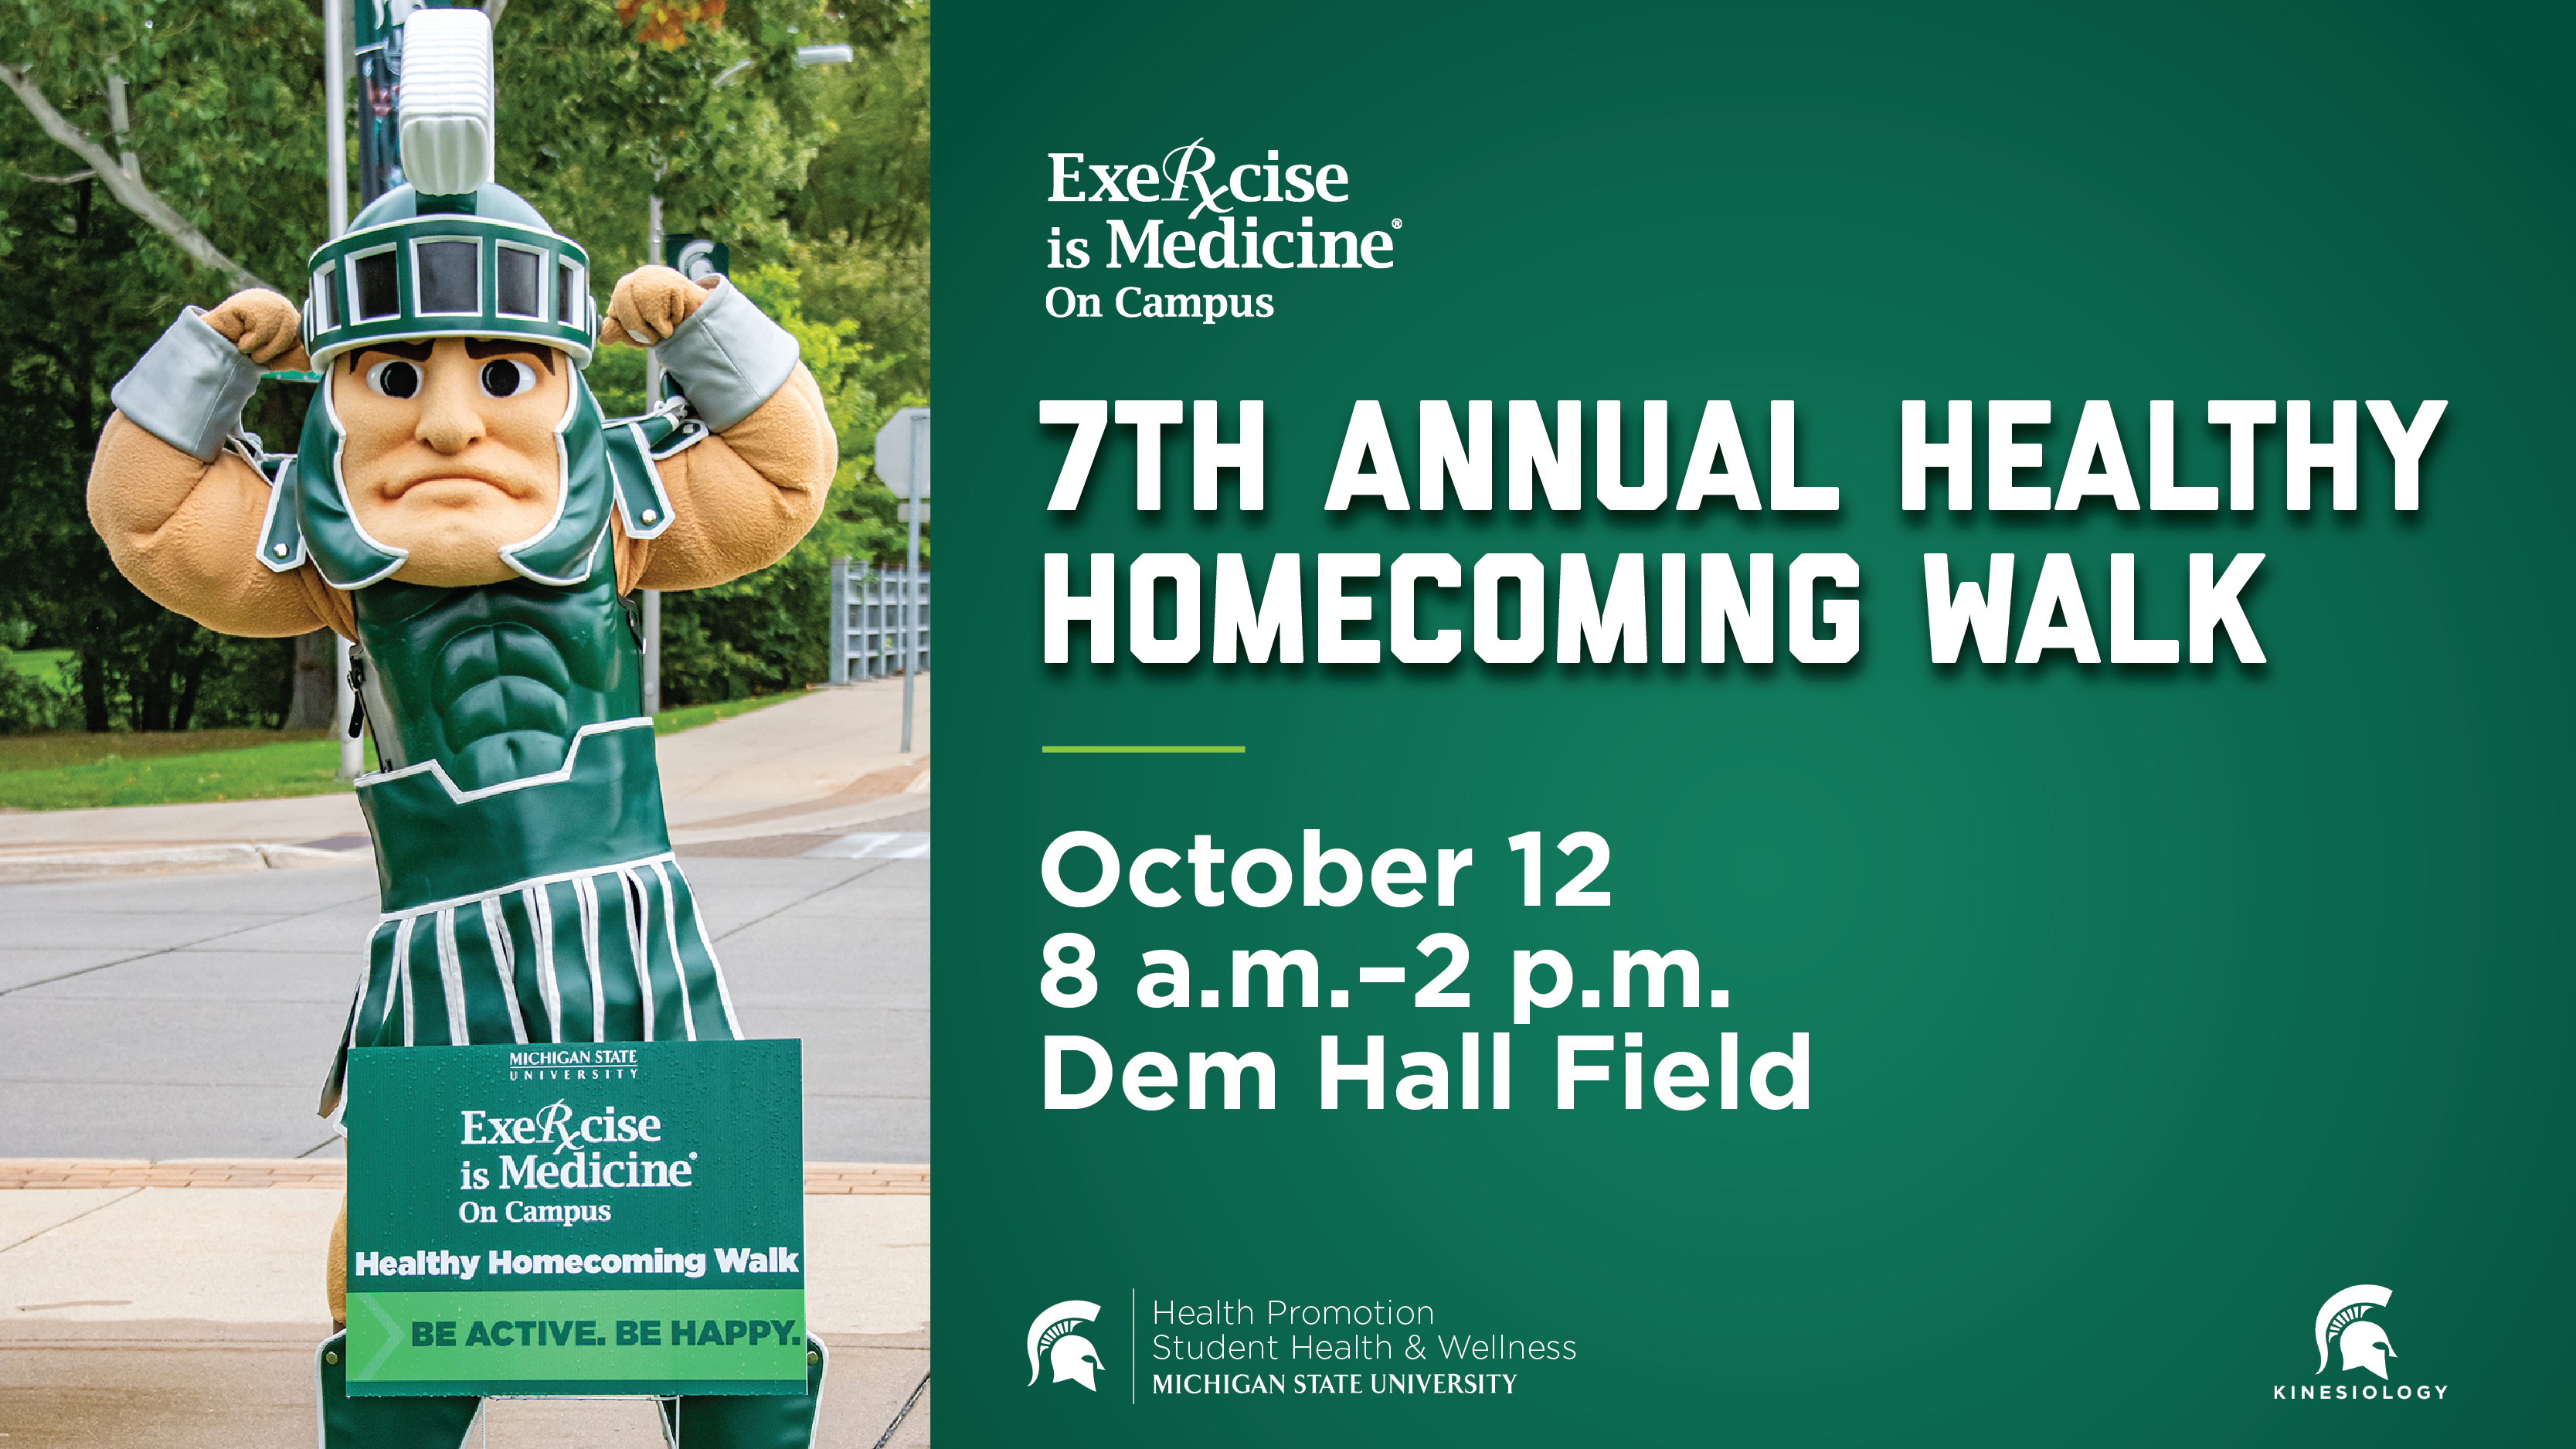 Sparty flexes his muscles on a sunny day. Text gives the date, time and location details of the 7th Annual Healthy Homecoming Walk.